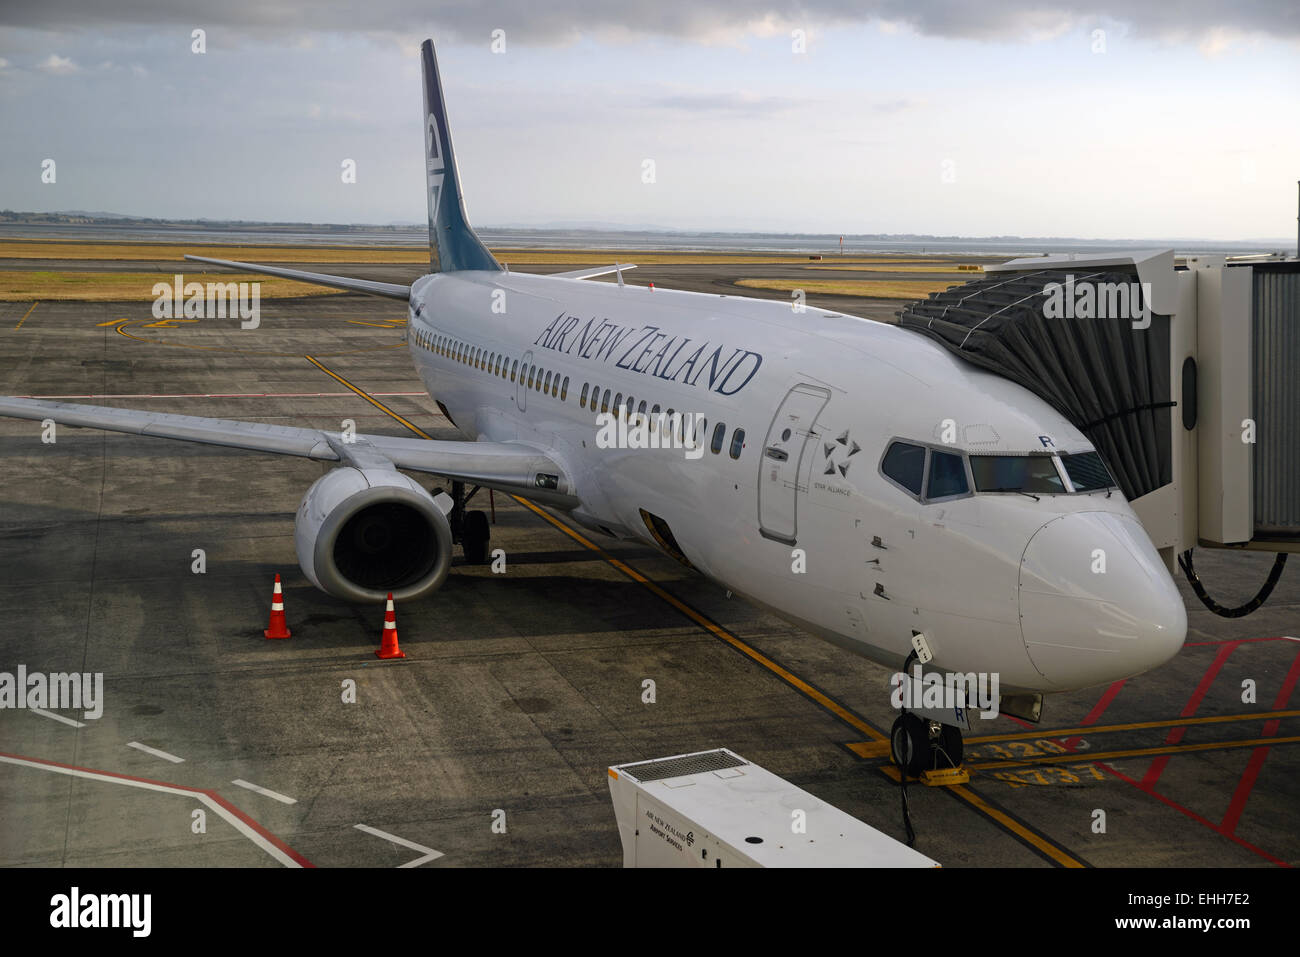 AUCKLAND, NEW ZEALAND, JANUARY 23, 2015: An Air New Zealand jet takes on passengers at Auckland Airport, Northland, New Zealand Stock Photo